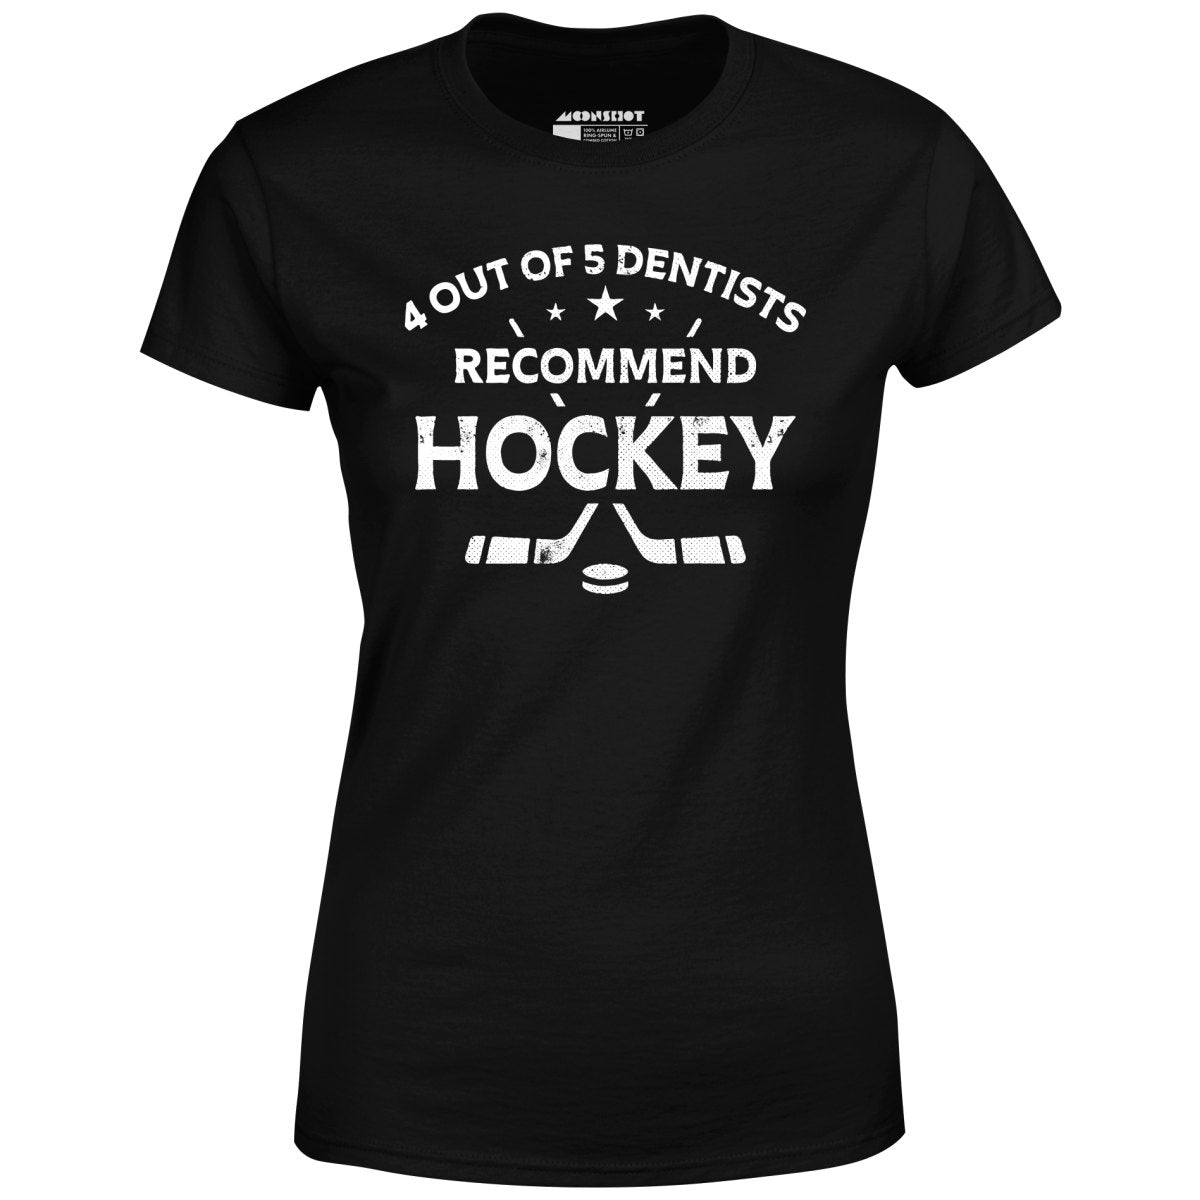 4 Out of 5 Dentists Recommend Hockey - Women's T-Shirt